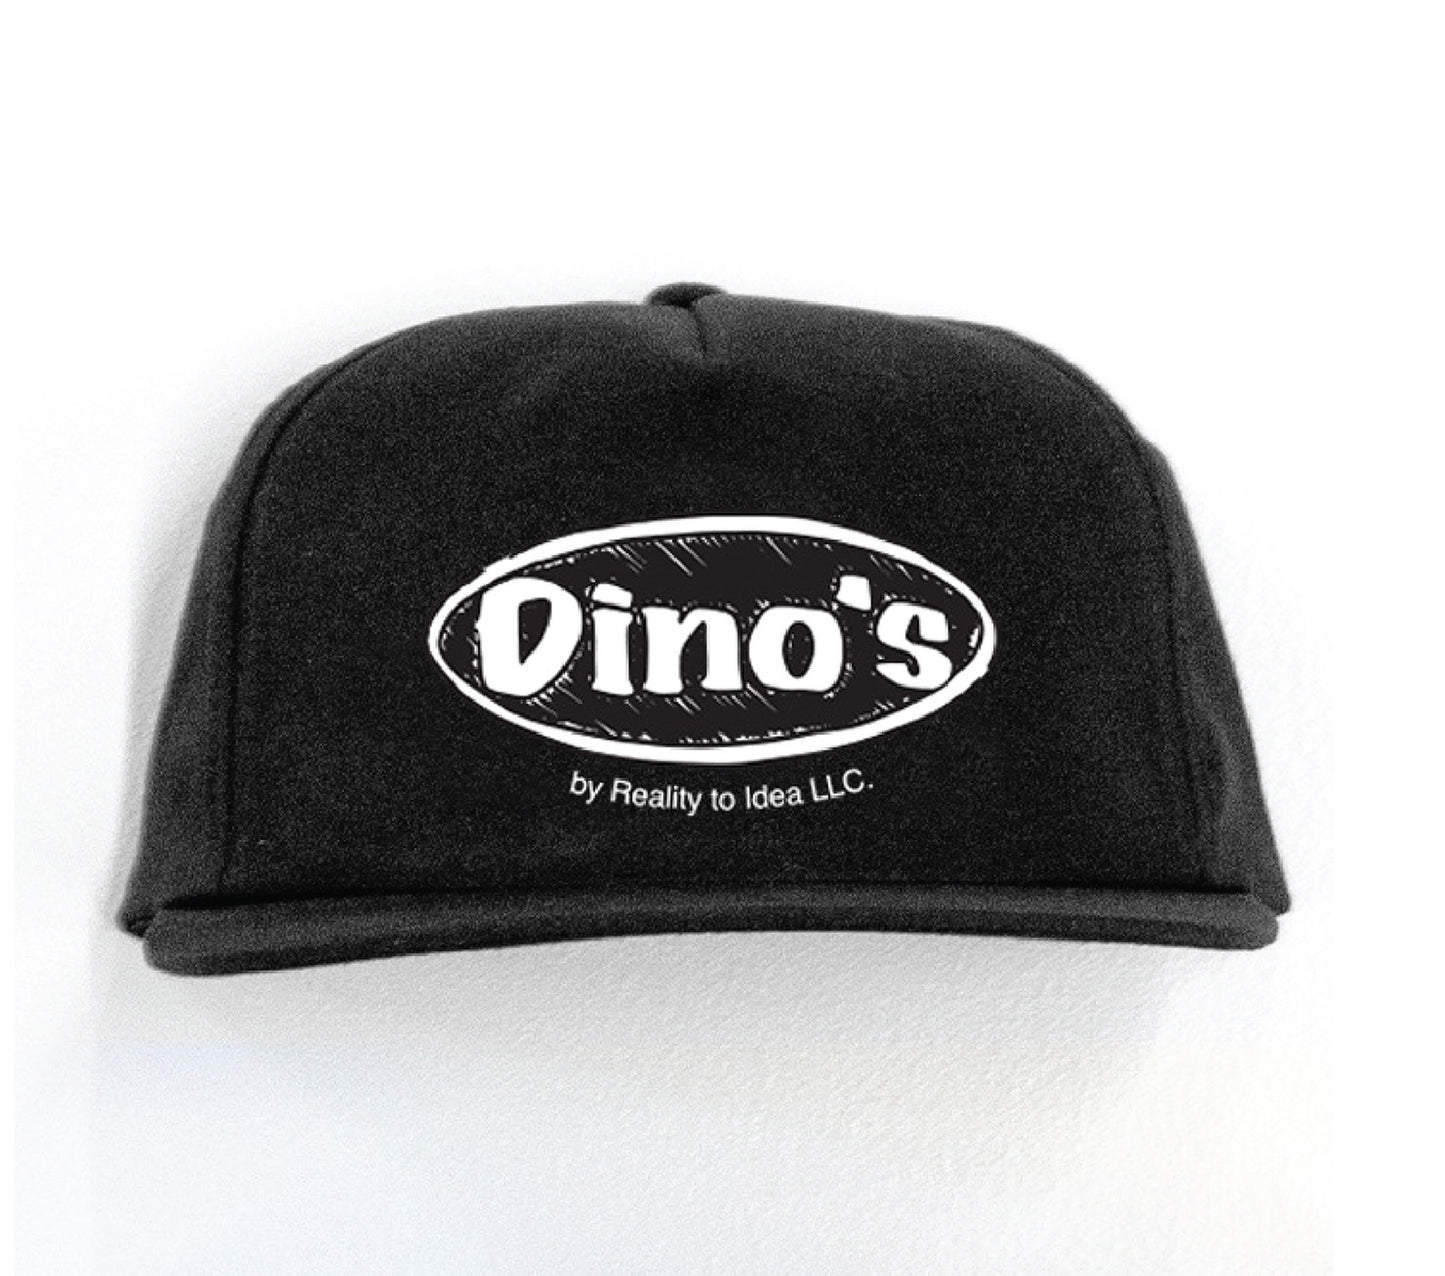 Dino's Famous Chicken X Josh Vides (Reality to Idea) HAT ONLY